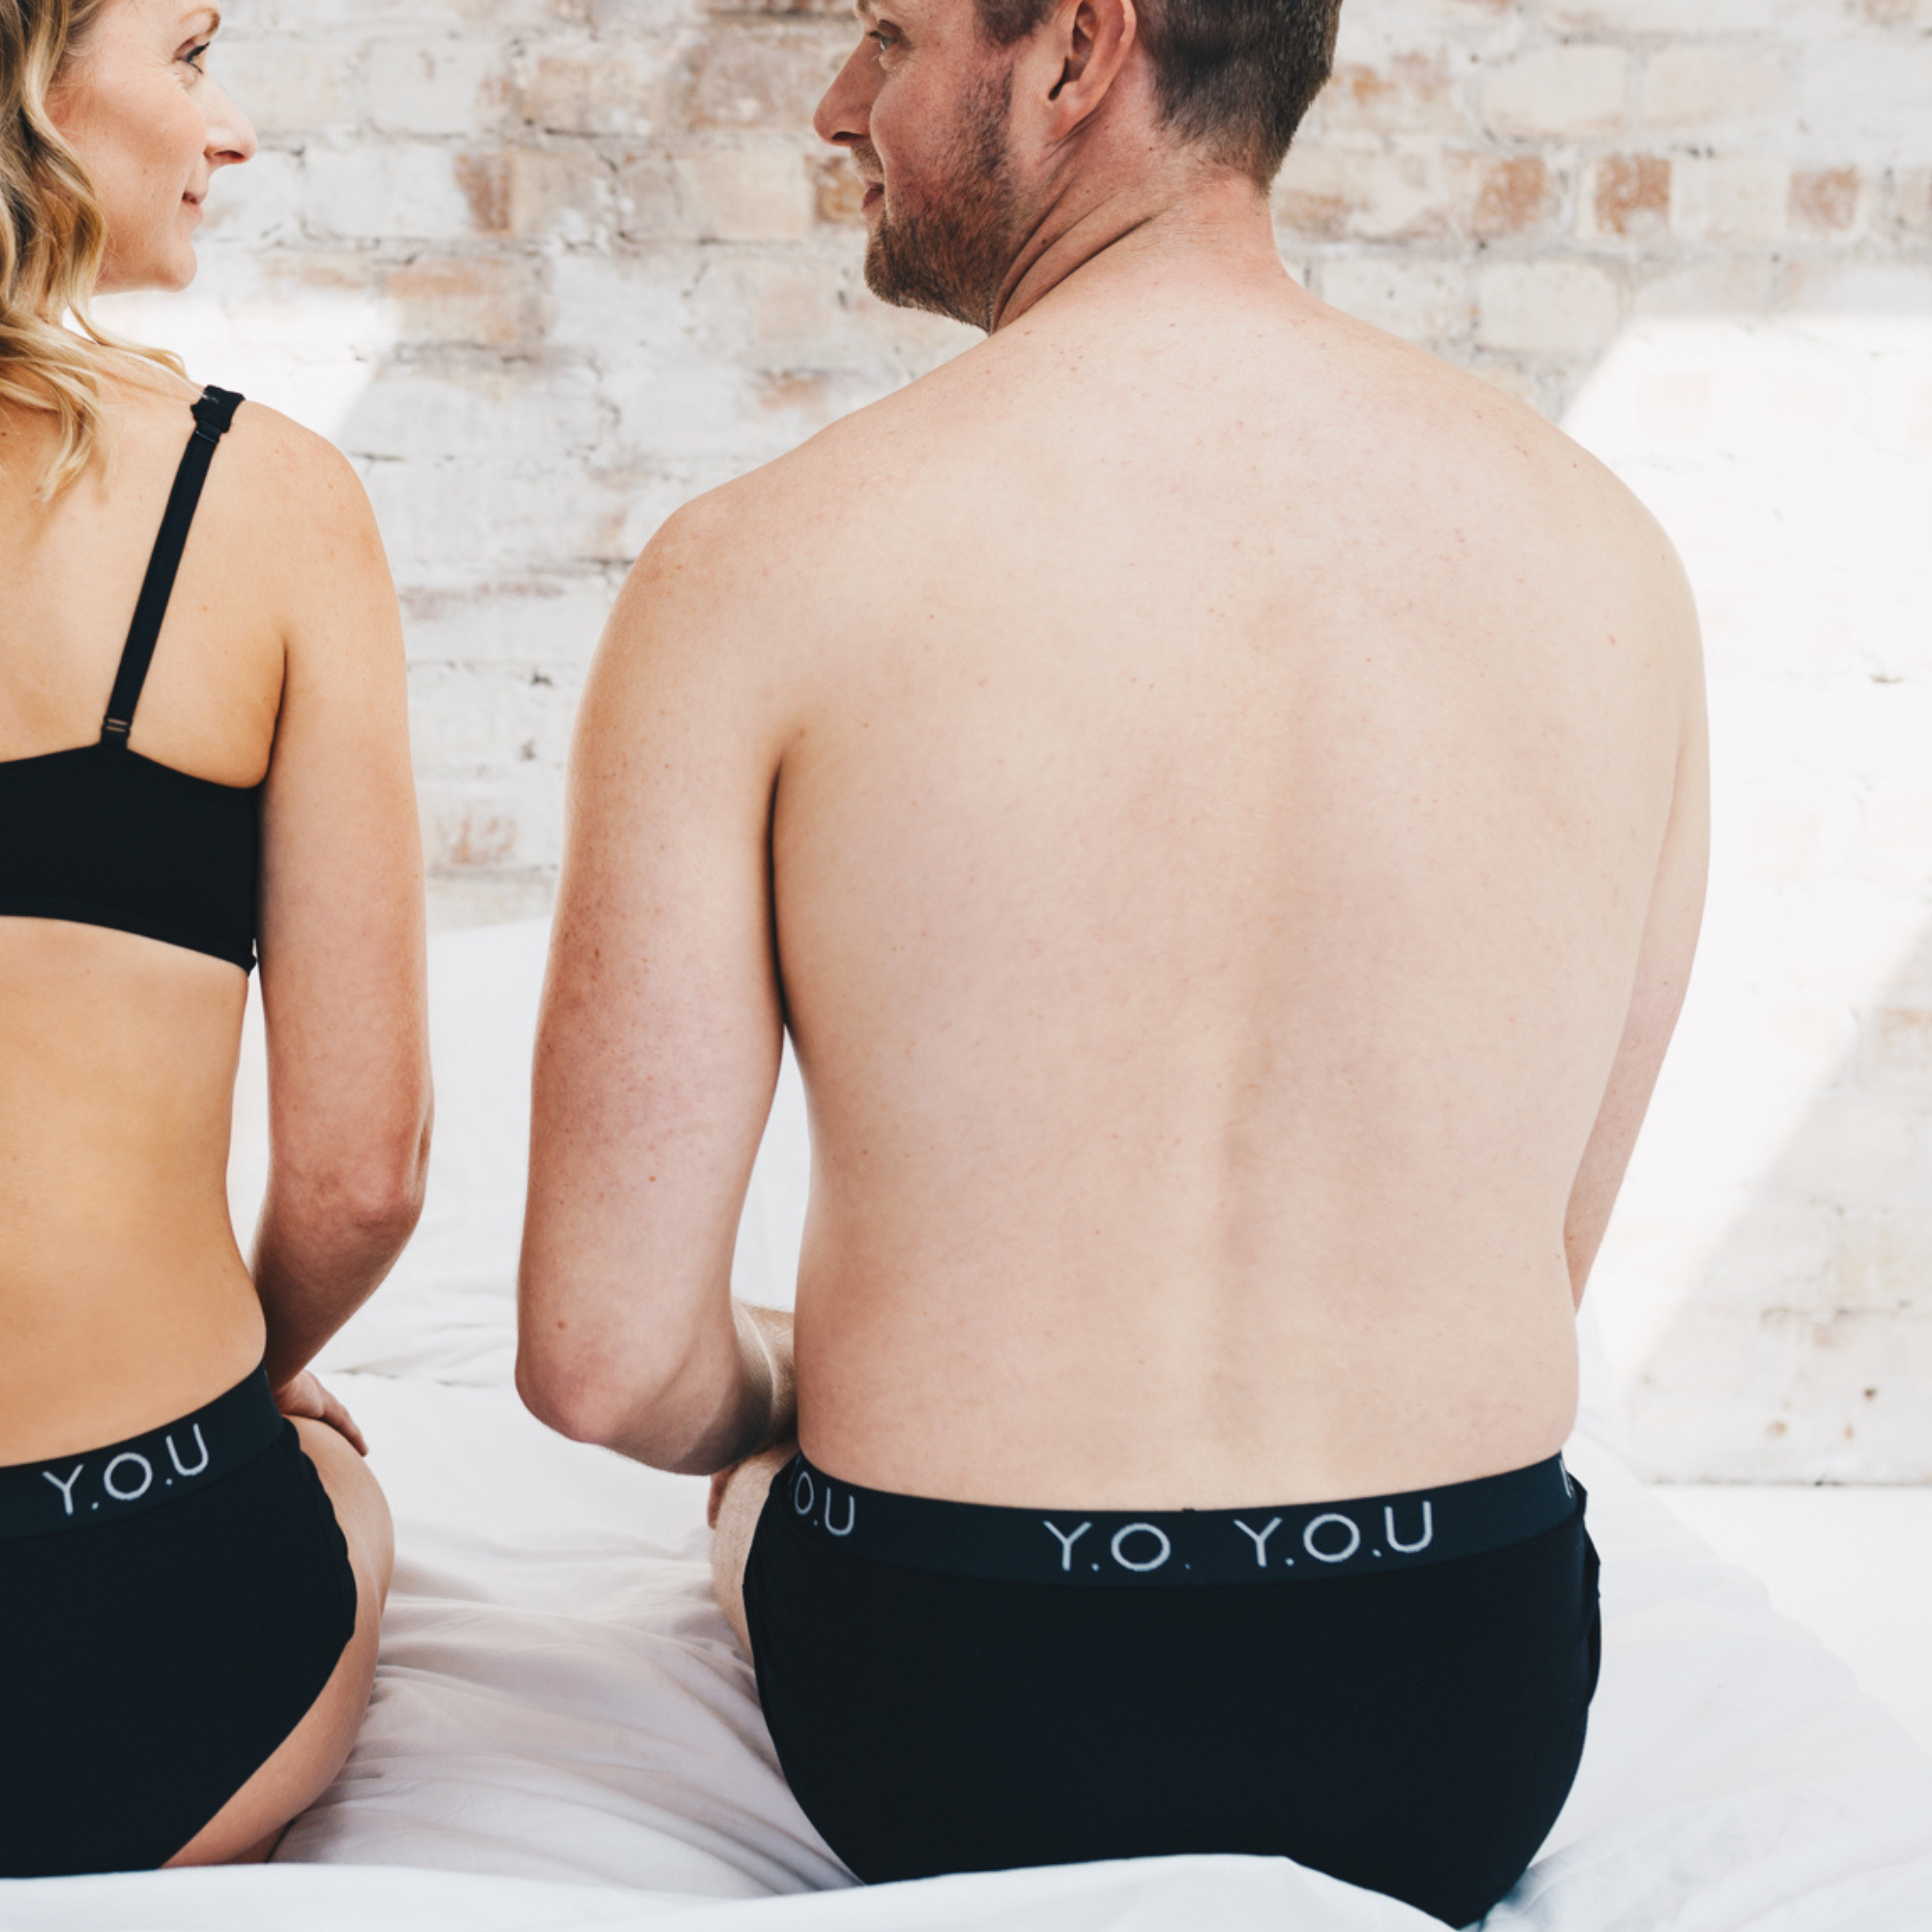 A woman and a man sit on a white bed, facing away from the camera. Both wear black underwear. The man's black hipster trunks have text that reads "Y.O.U" on the waistband. The background features a light brick wall.